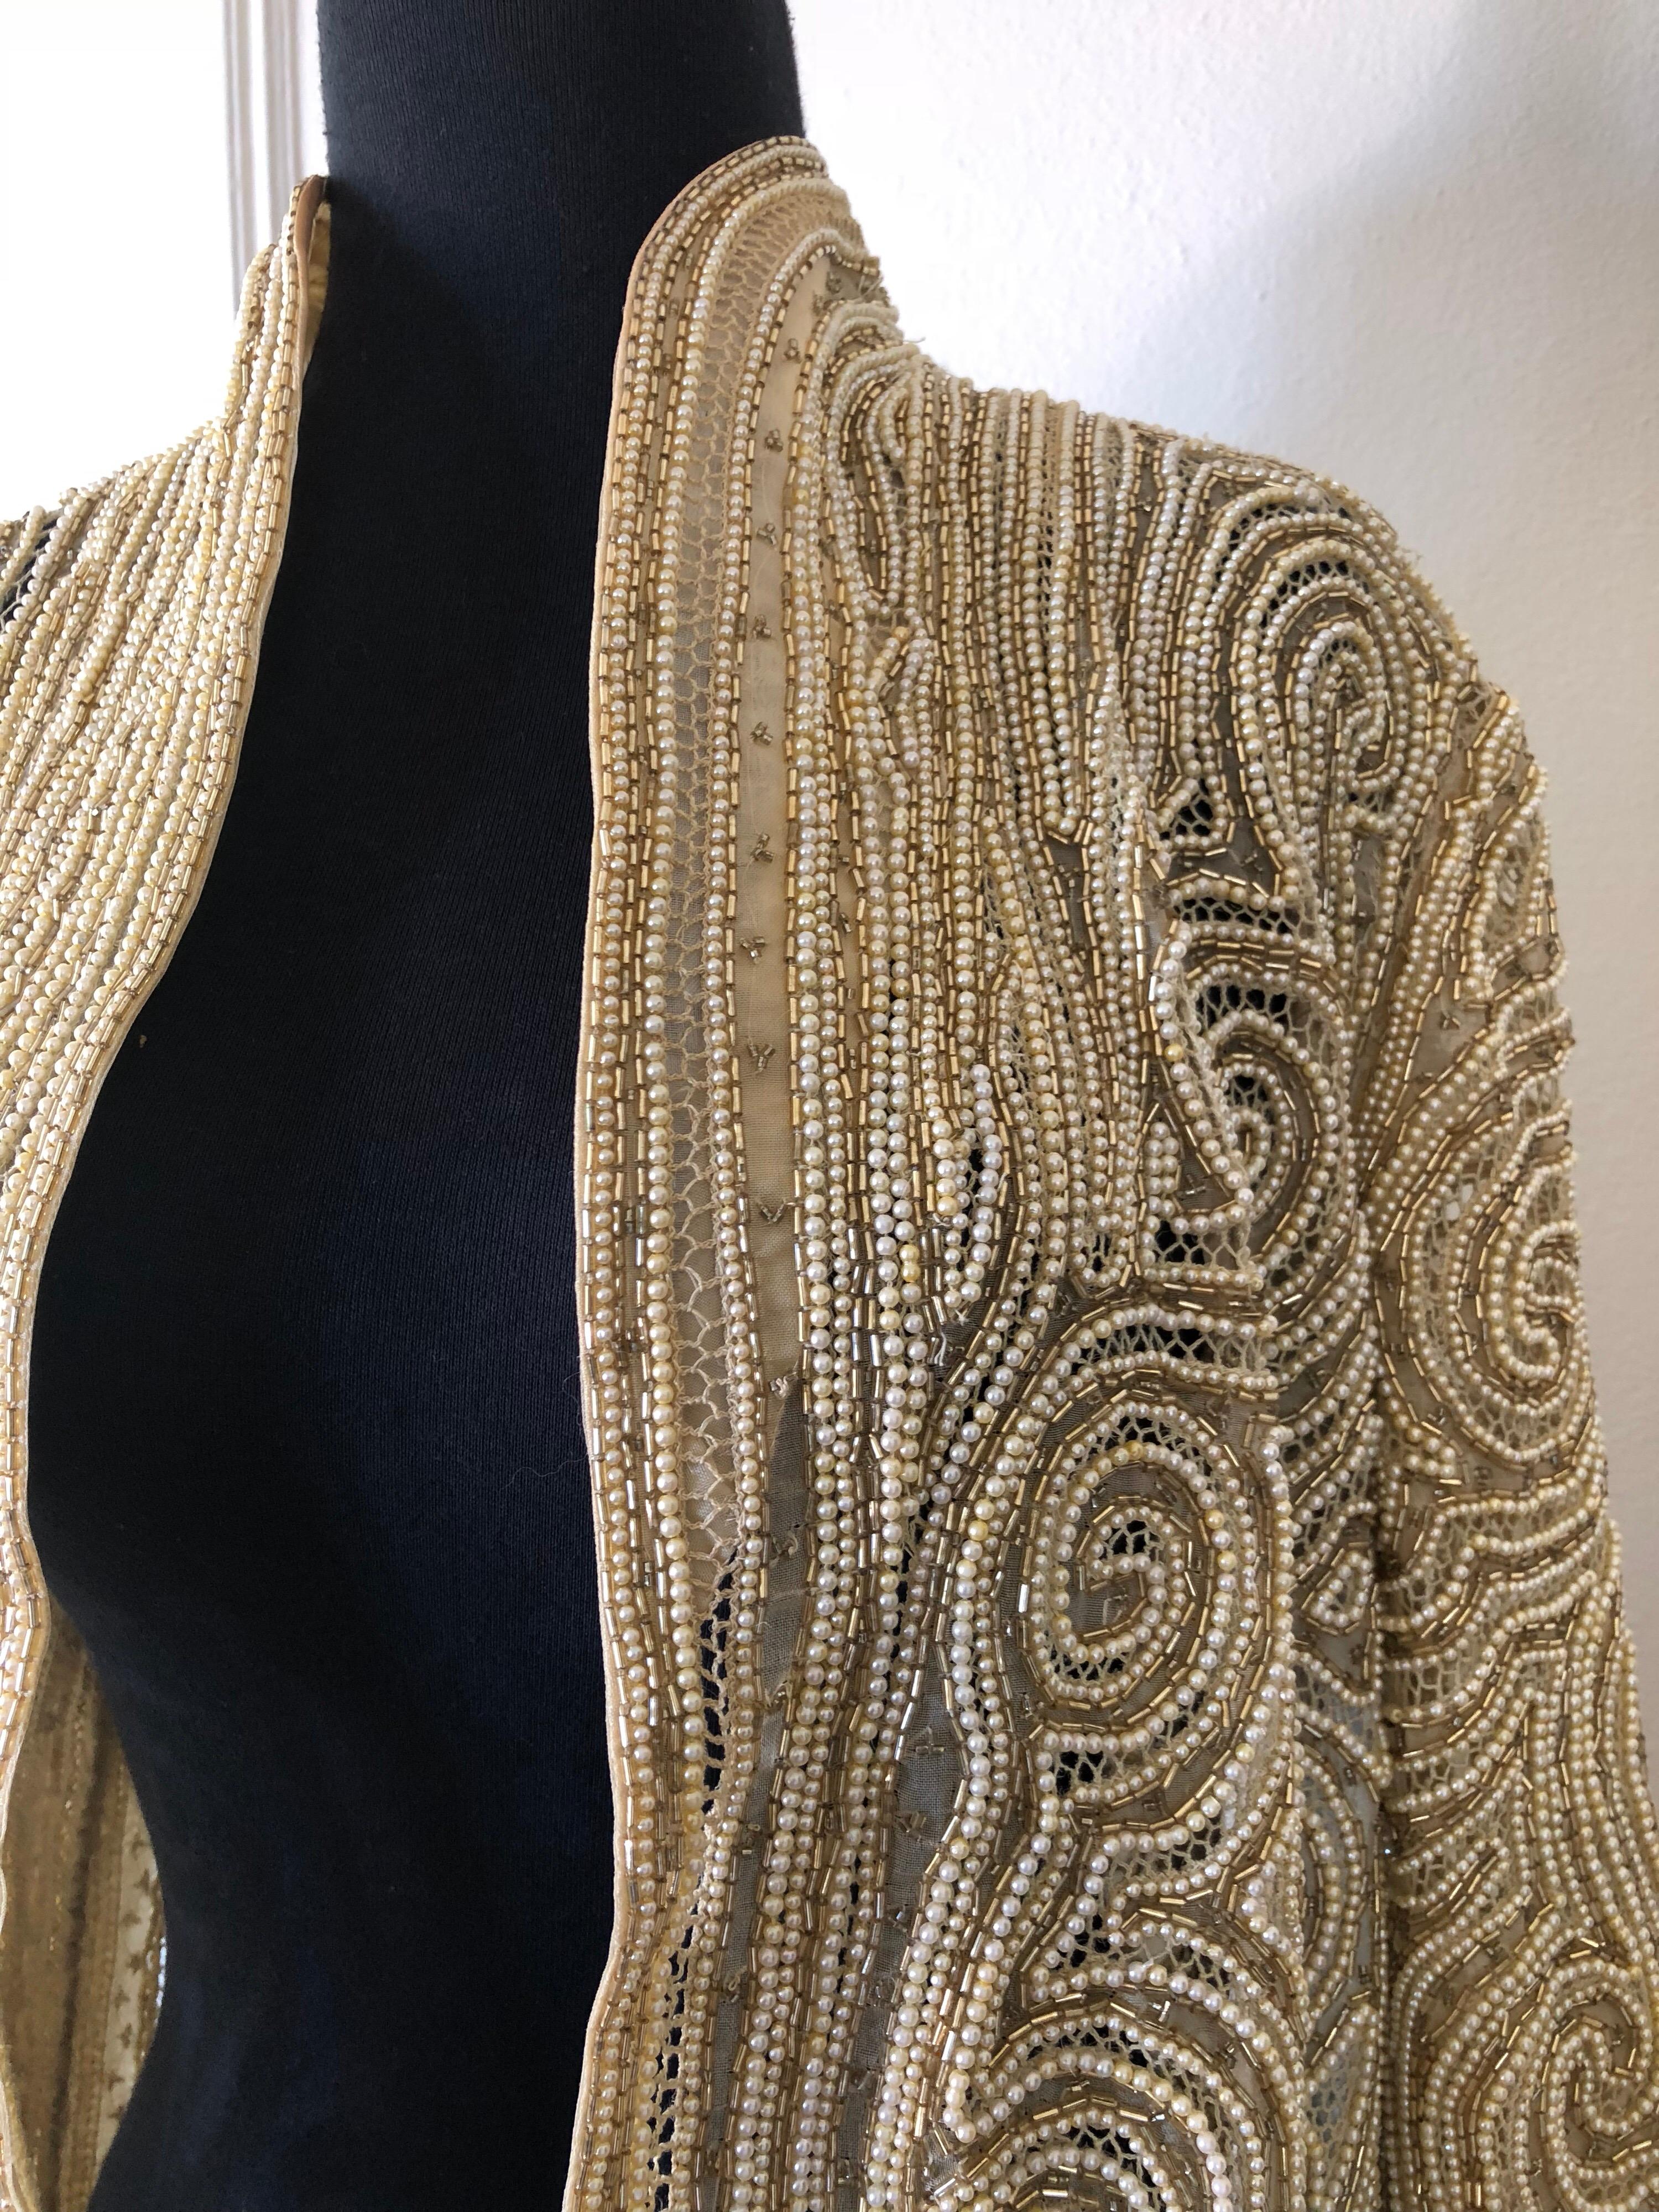 A gorgeous 1980s Halston faux pearl, crochet and gold bugle beaded silk organza lace jacket. Unlined. No closures. Originally sold at Amen Wardy. Size 6-8.